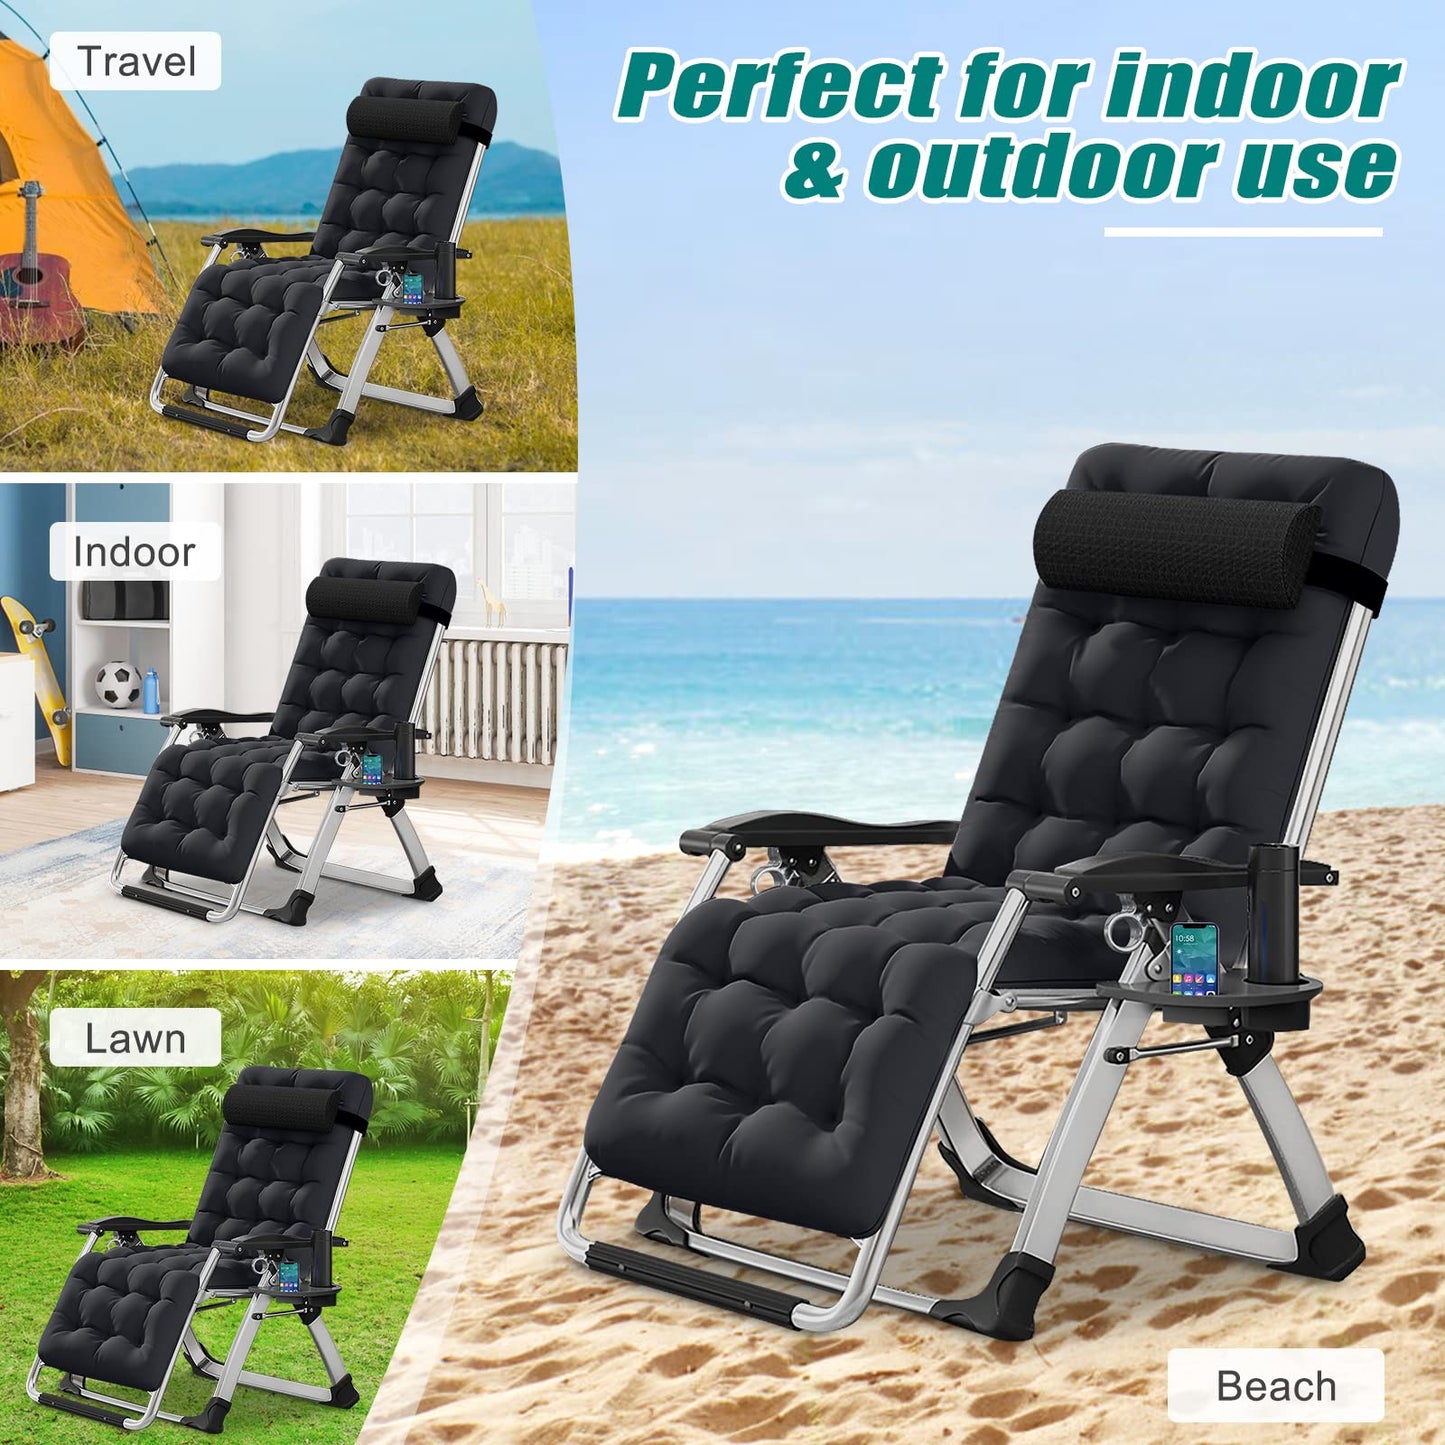 Zero Gravity Chair, Lawn Recliner, Reclining Patio Lounger Chair, Folding Portable Chaise with Detachable Soft Cushion, Cup Holder, Headrest Black Zero Gravity Chair